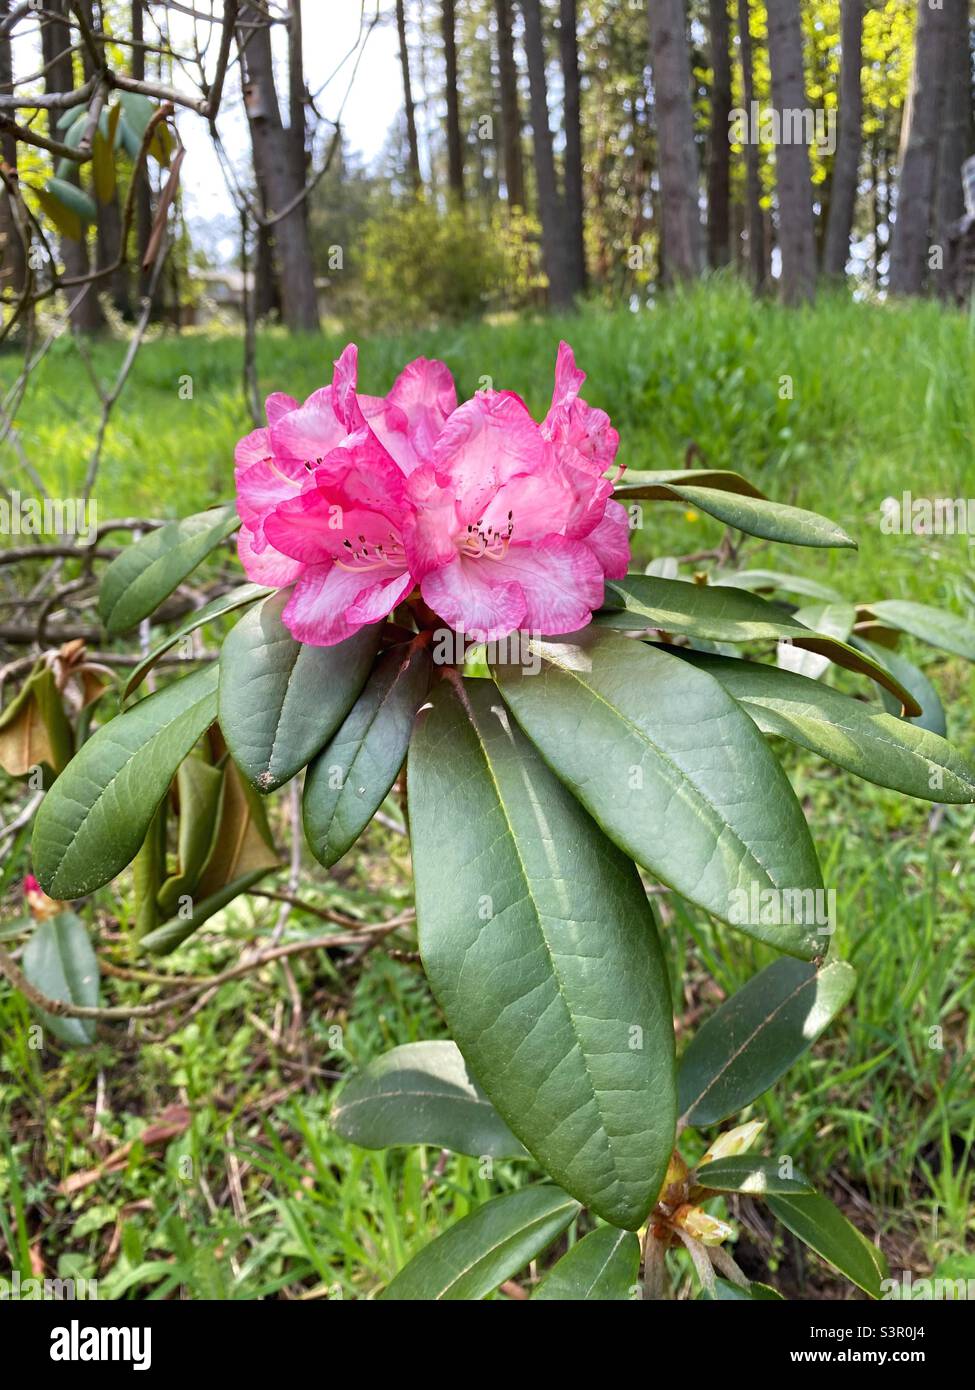 A pink rhododendron flower. Stock Photo